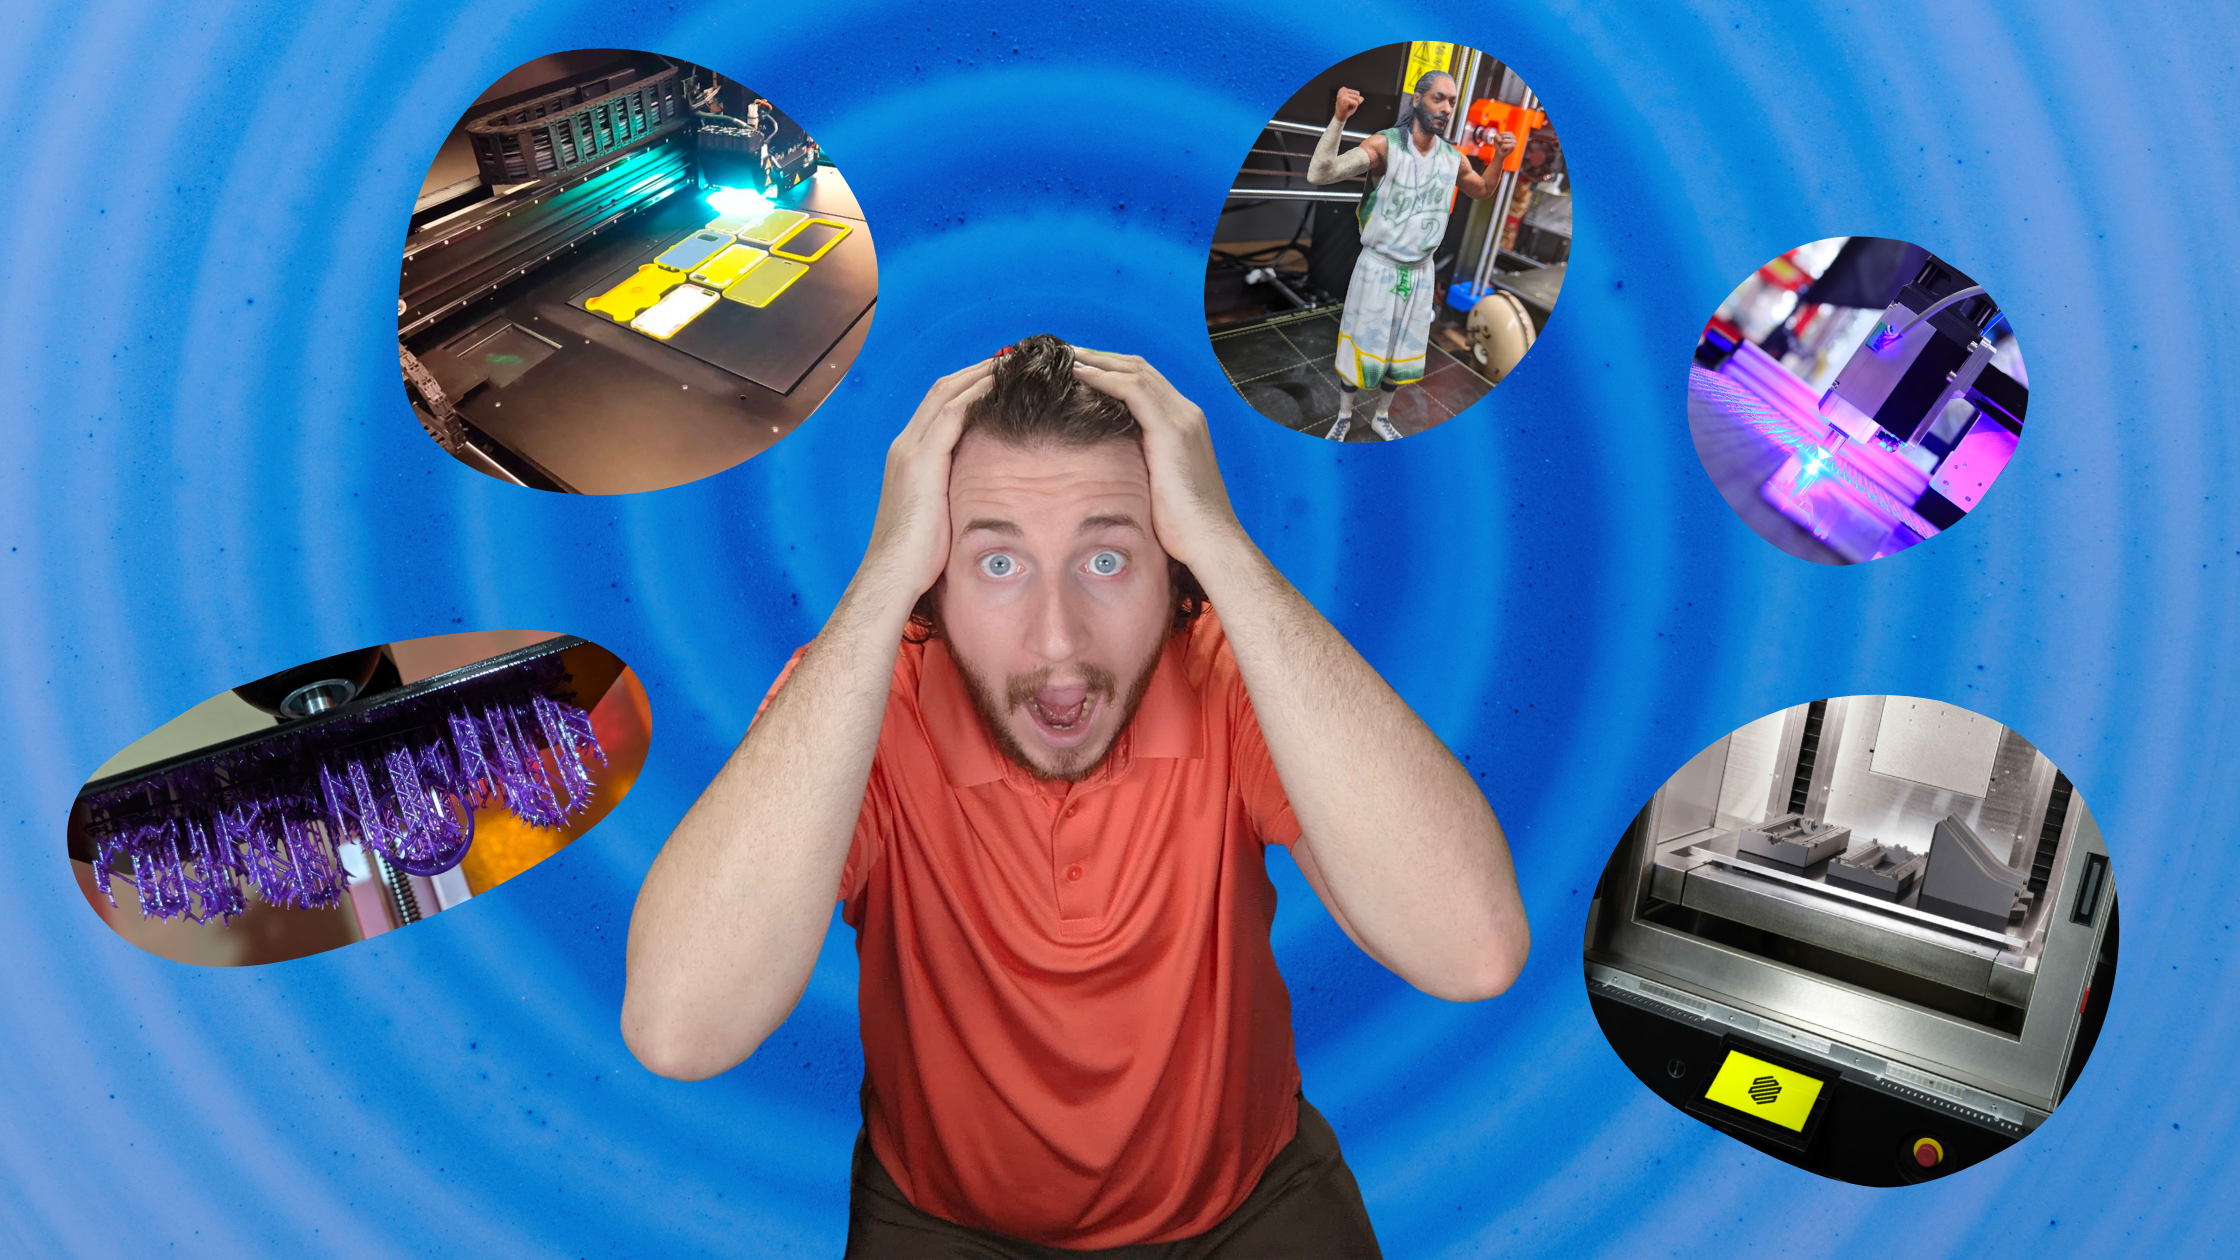 Overwhelmed man in front of blue spiral background surrounded by different types of 3D printers.